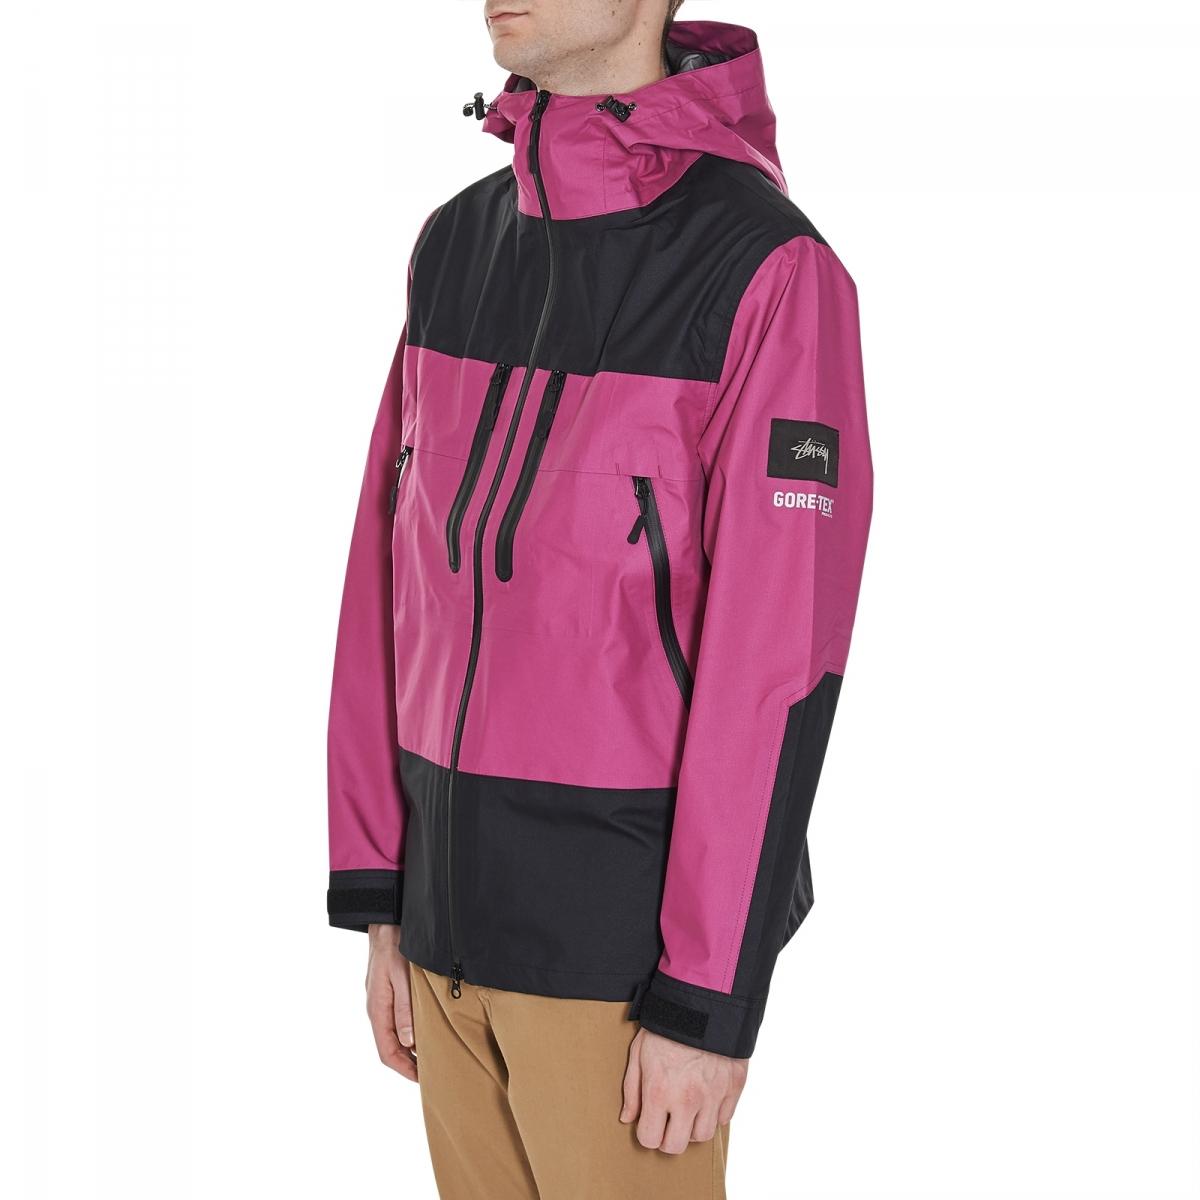 Stussy Gore-tex Mountain Parka in Black for Men - Lyst